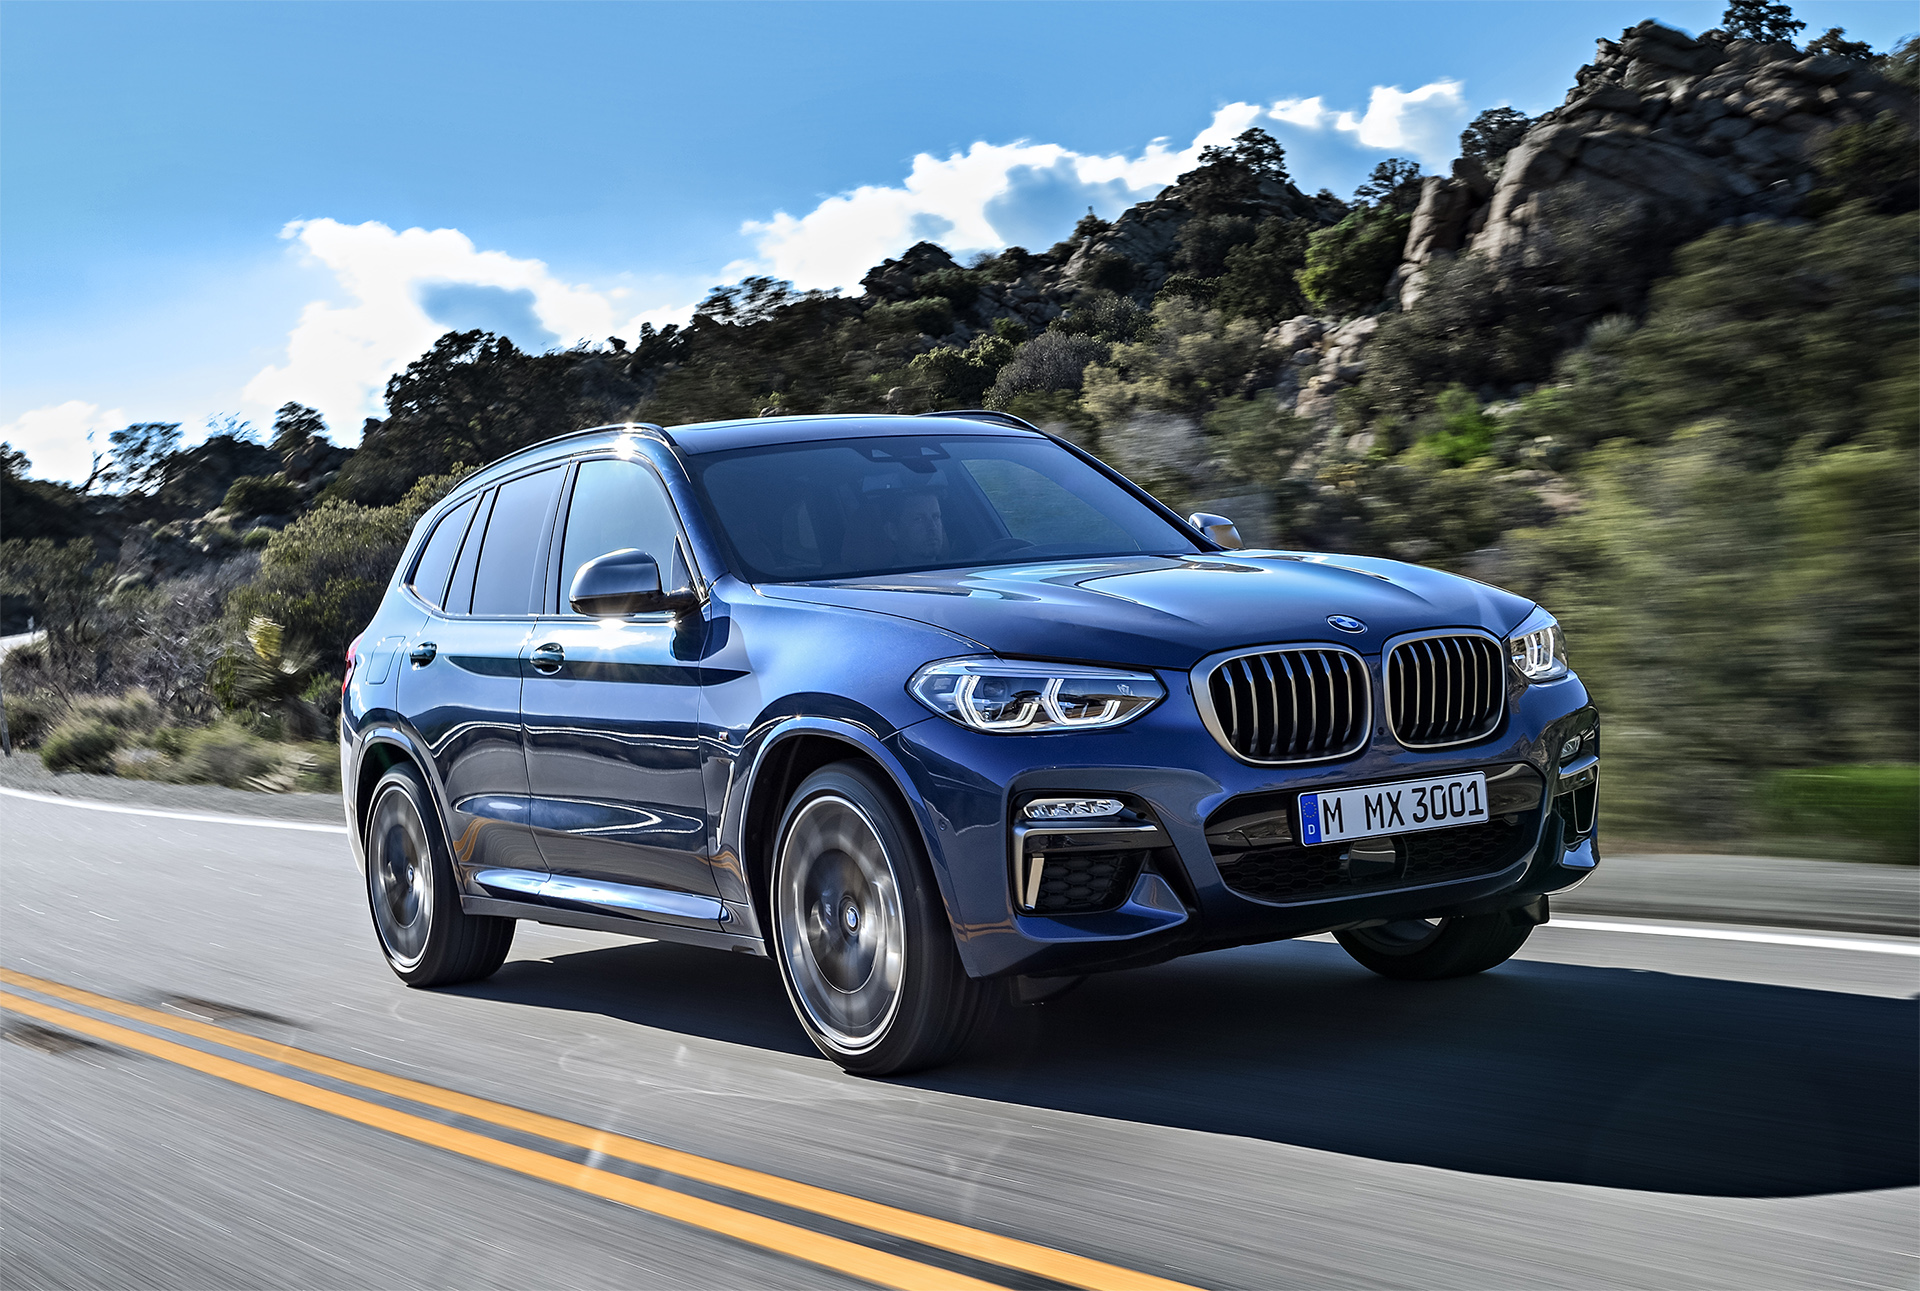 2018 BMW X3 G01 Official Thread: All the information, wallpapers and